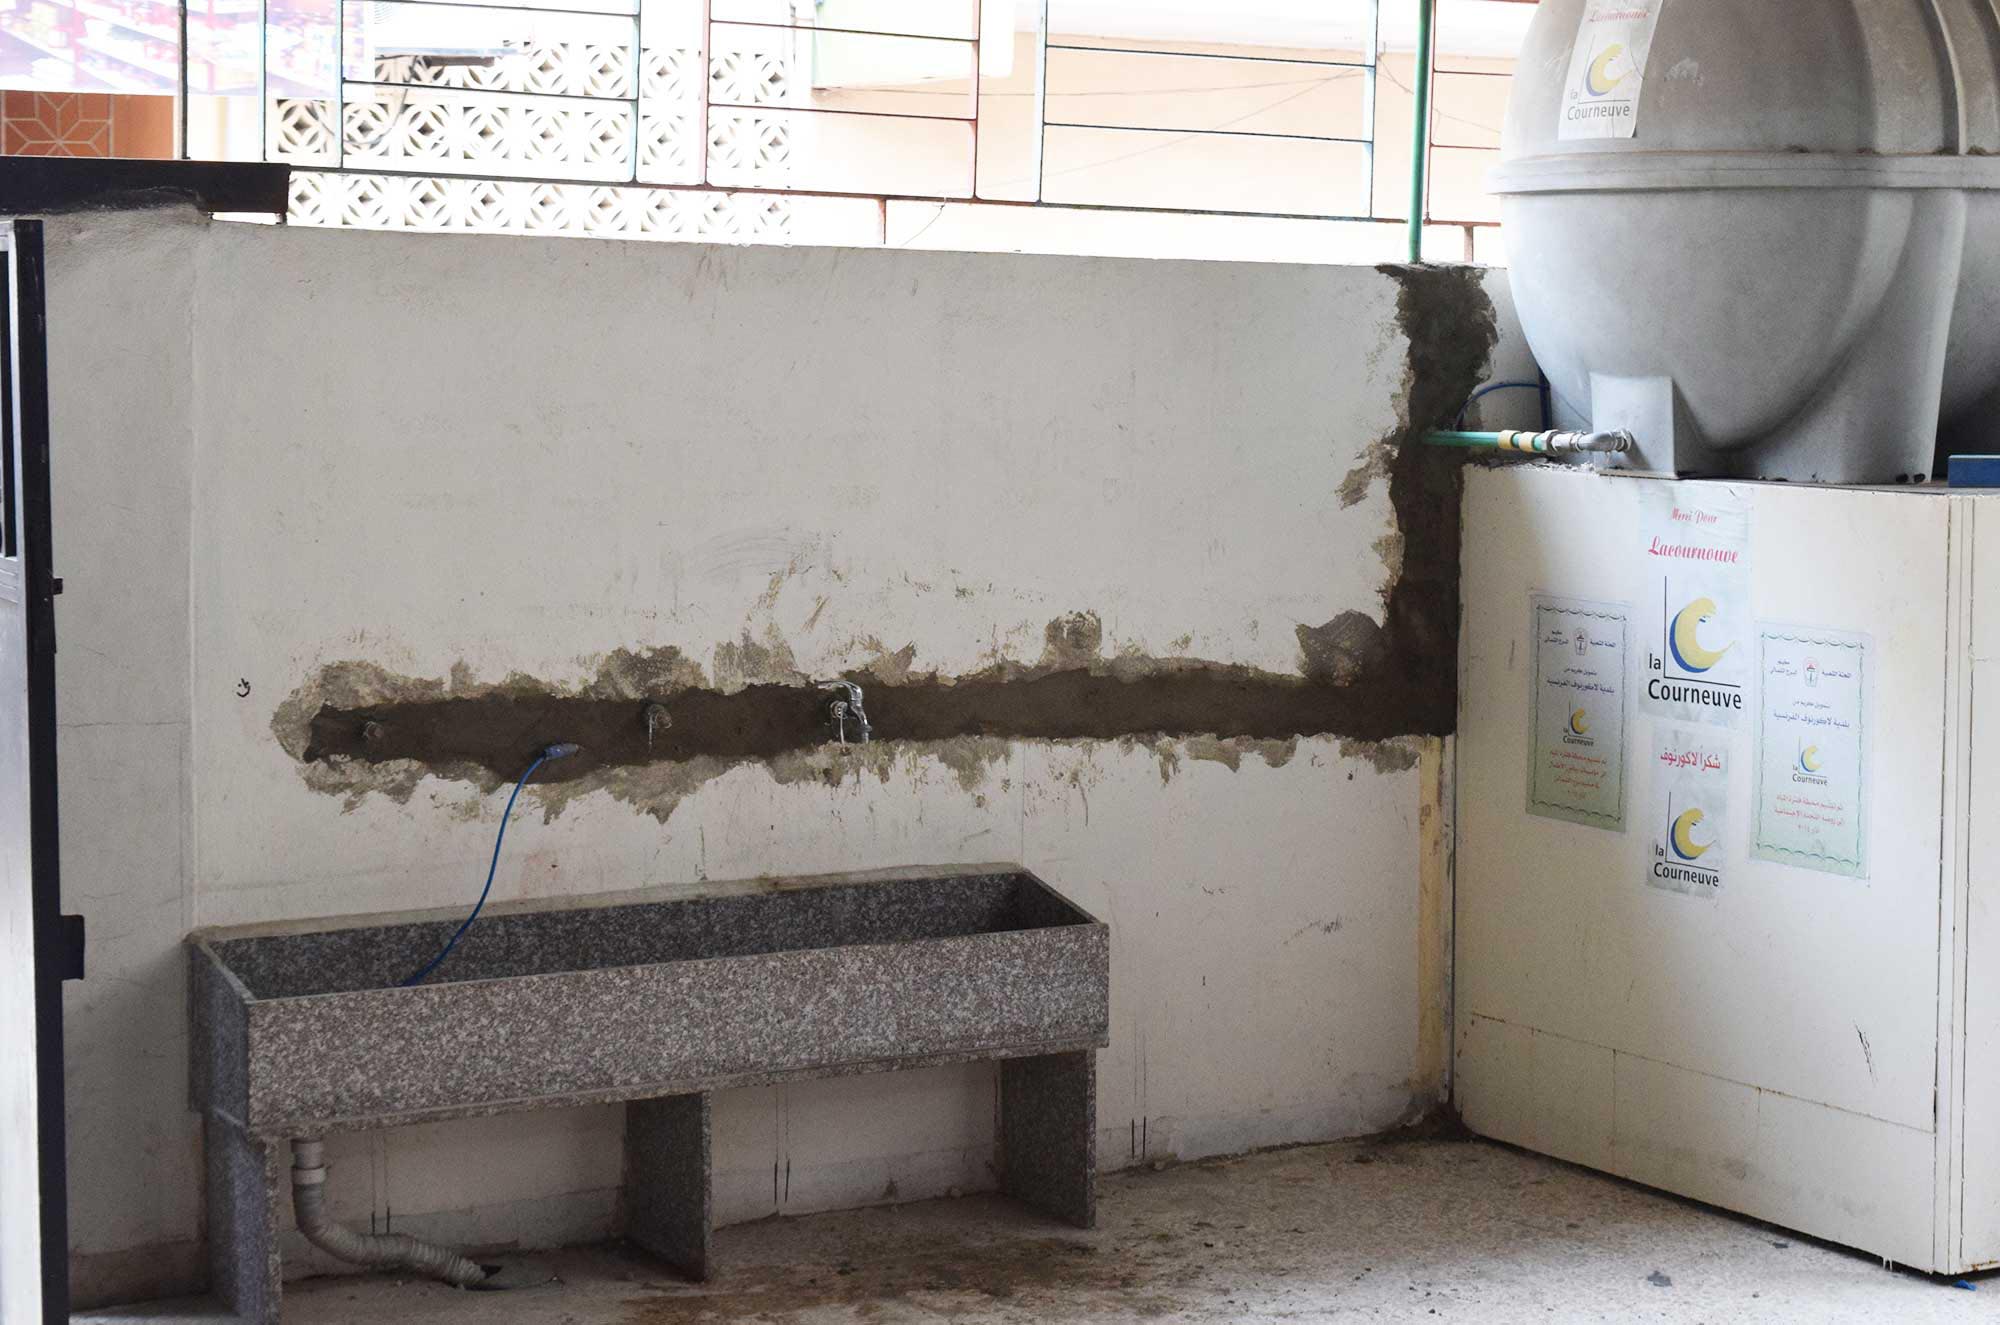 The old sinks at a Lebanon preschool.